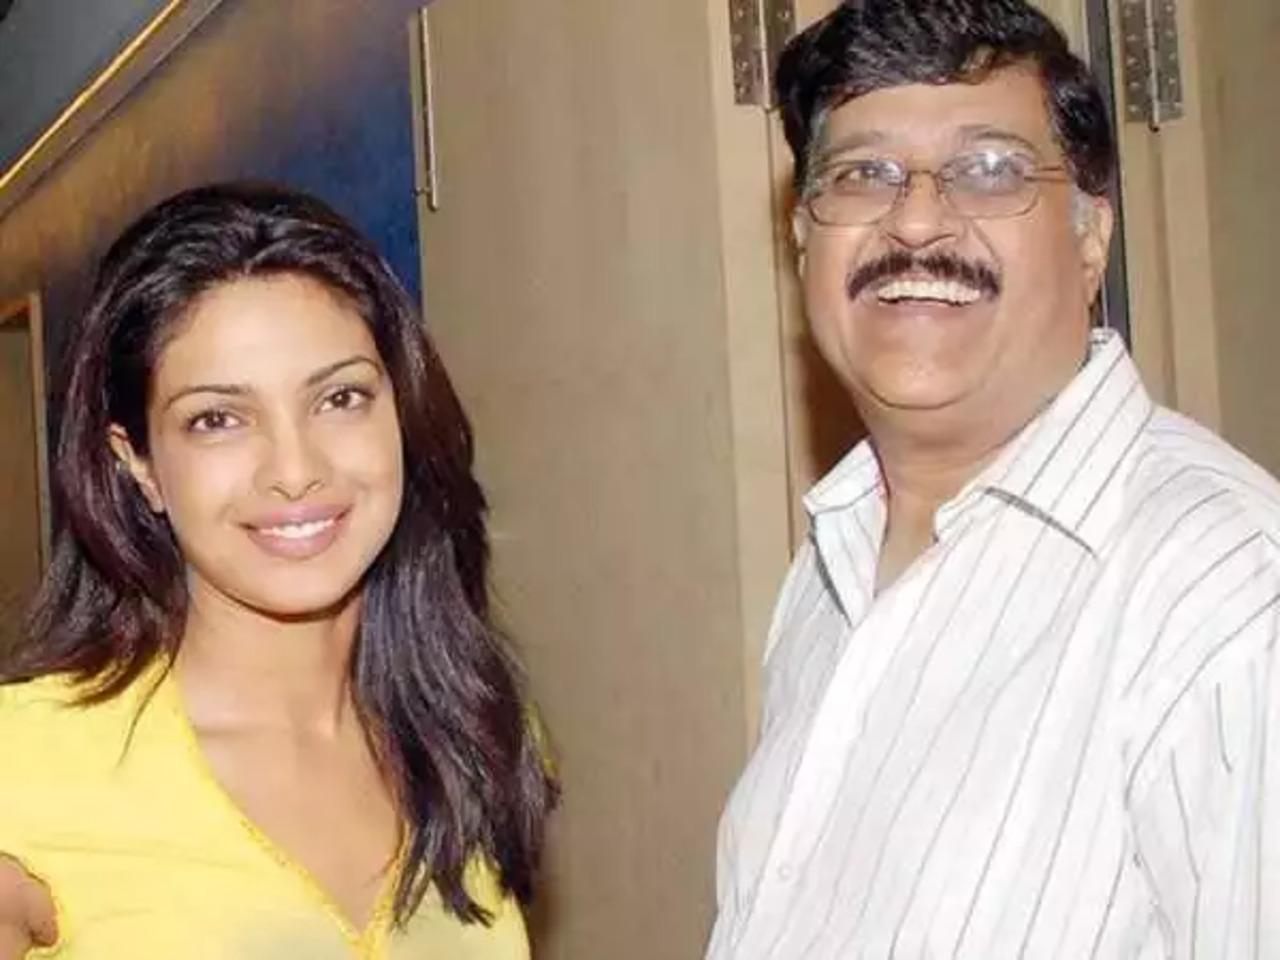 Priyanka Chopra's father Dr. Ashok Chopra was a doctor in the Indian army. He retired from the army in 1997 and thereafter he opened three hospitals in Bareilly renowned as Kasturi Hospitals